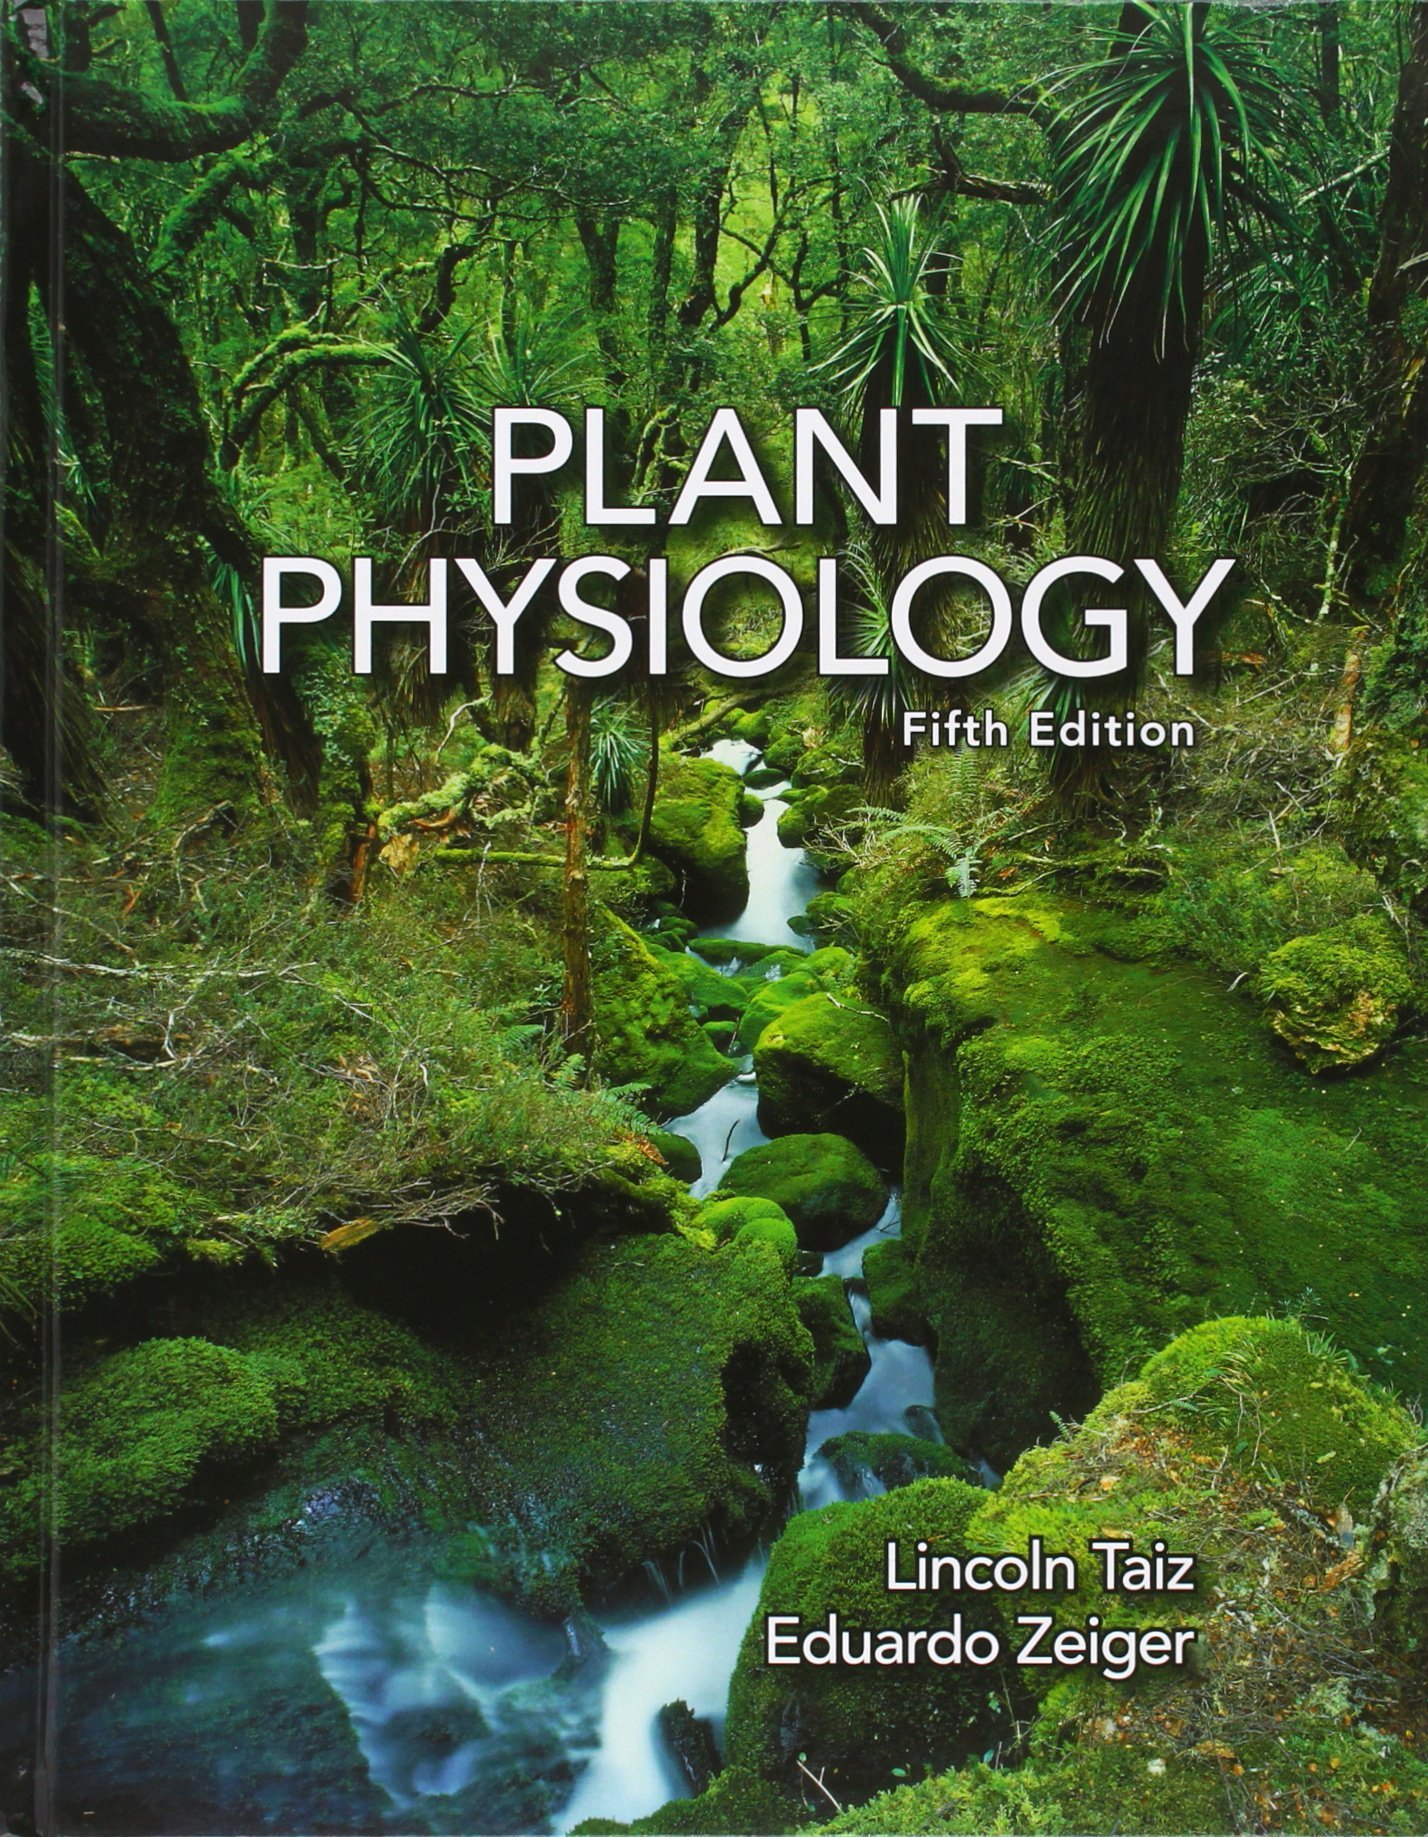 plant physiology video download